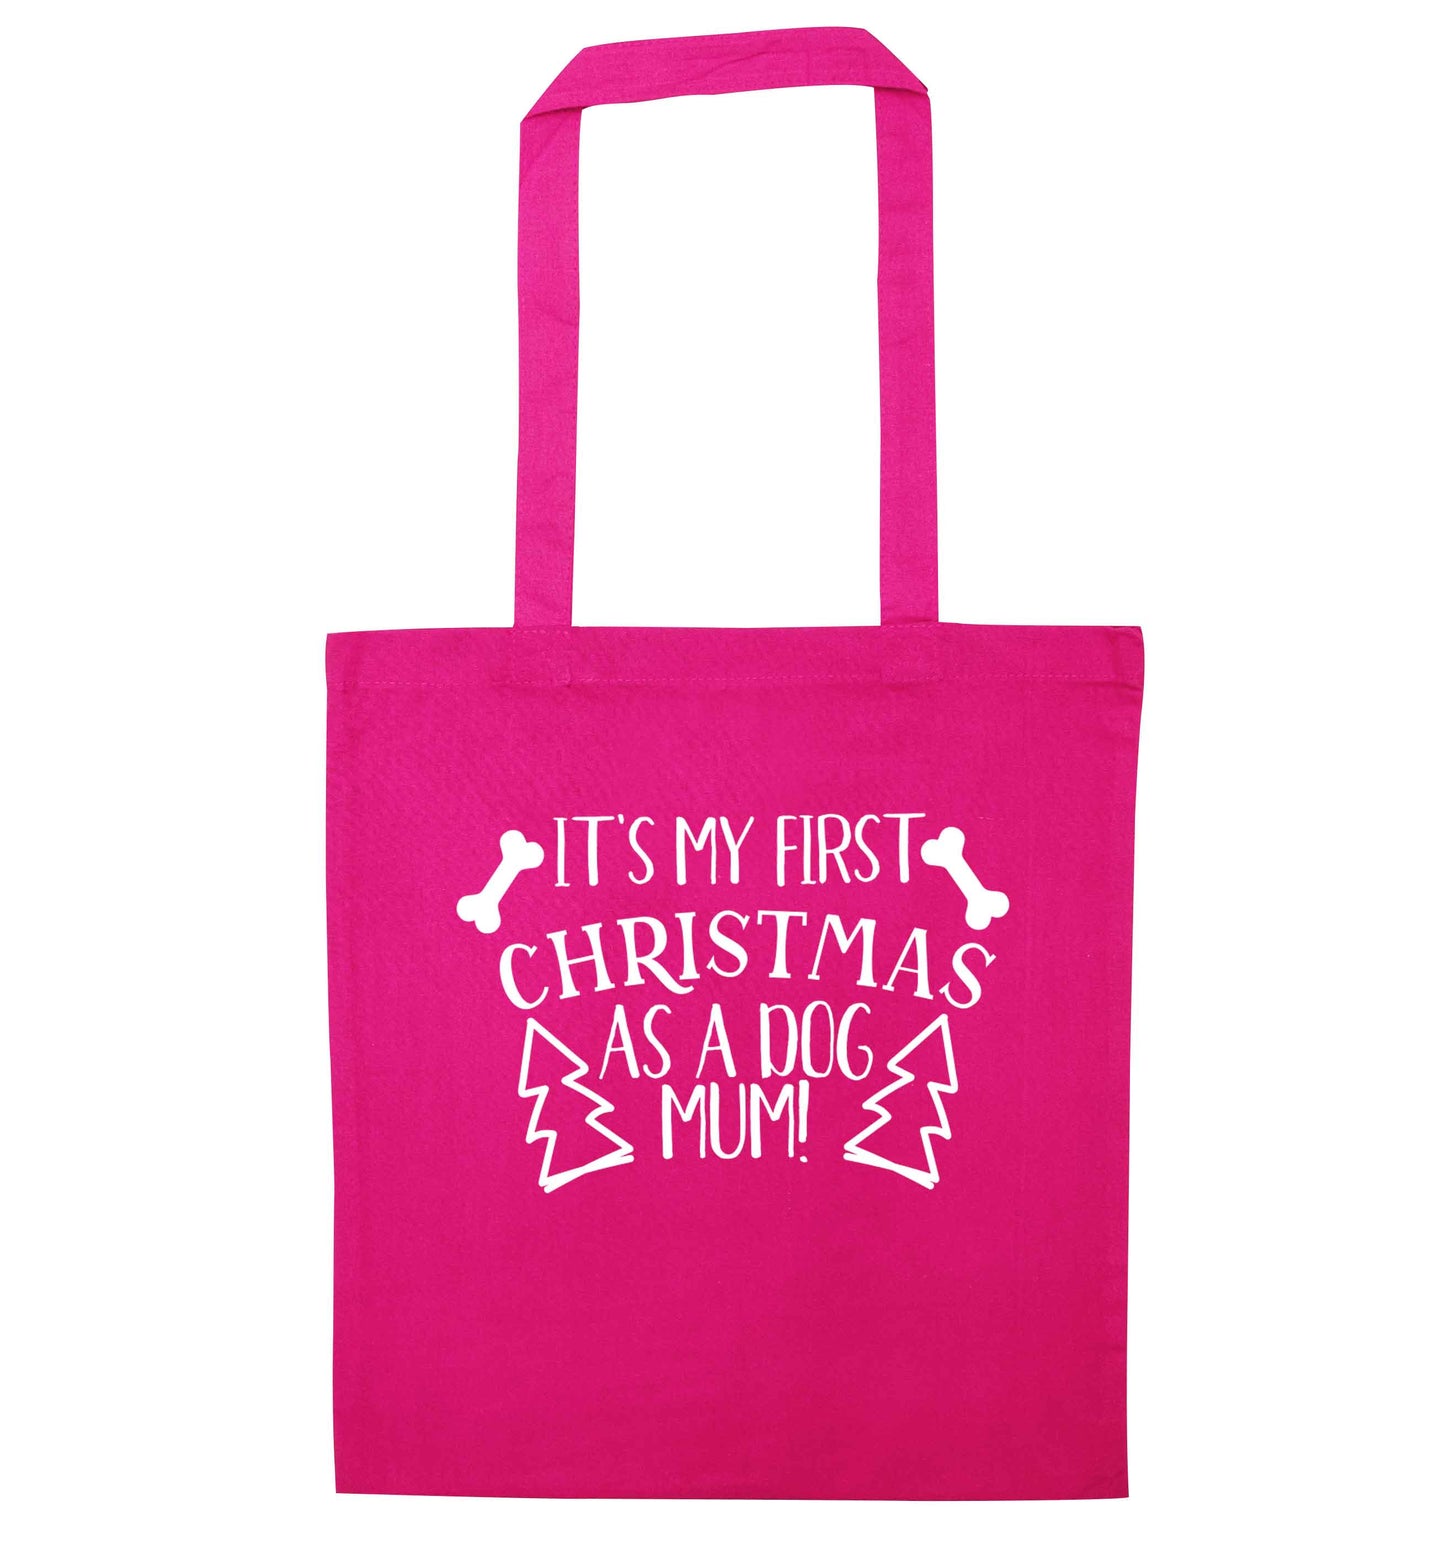 It's my first Christmas as a dog mum! pink tote bag